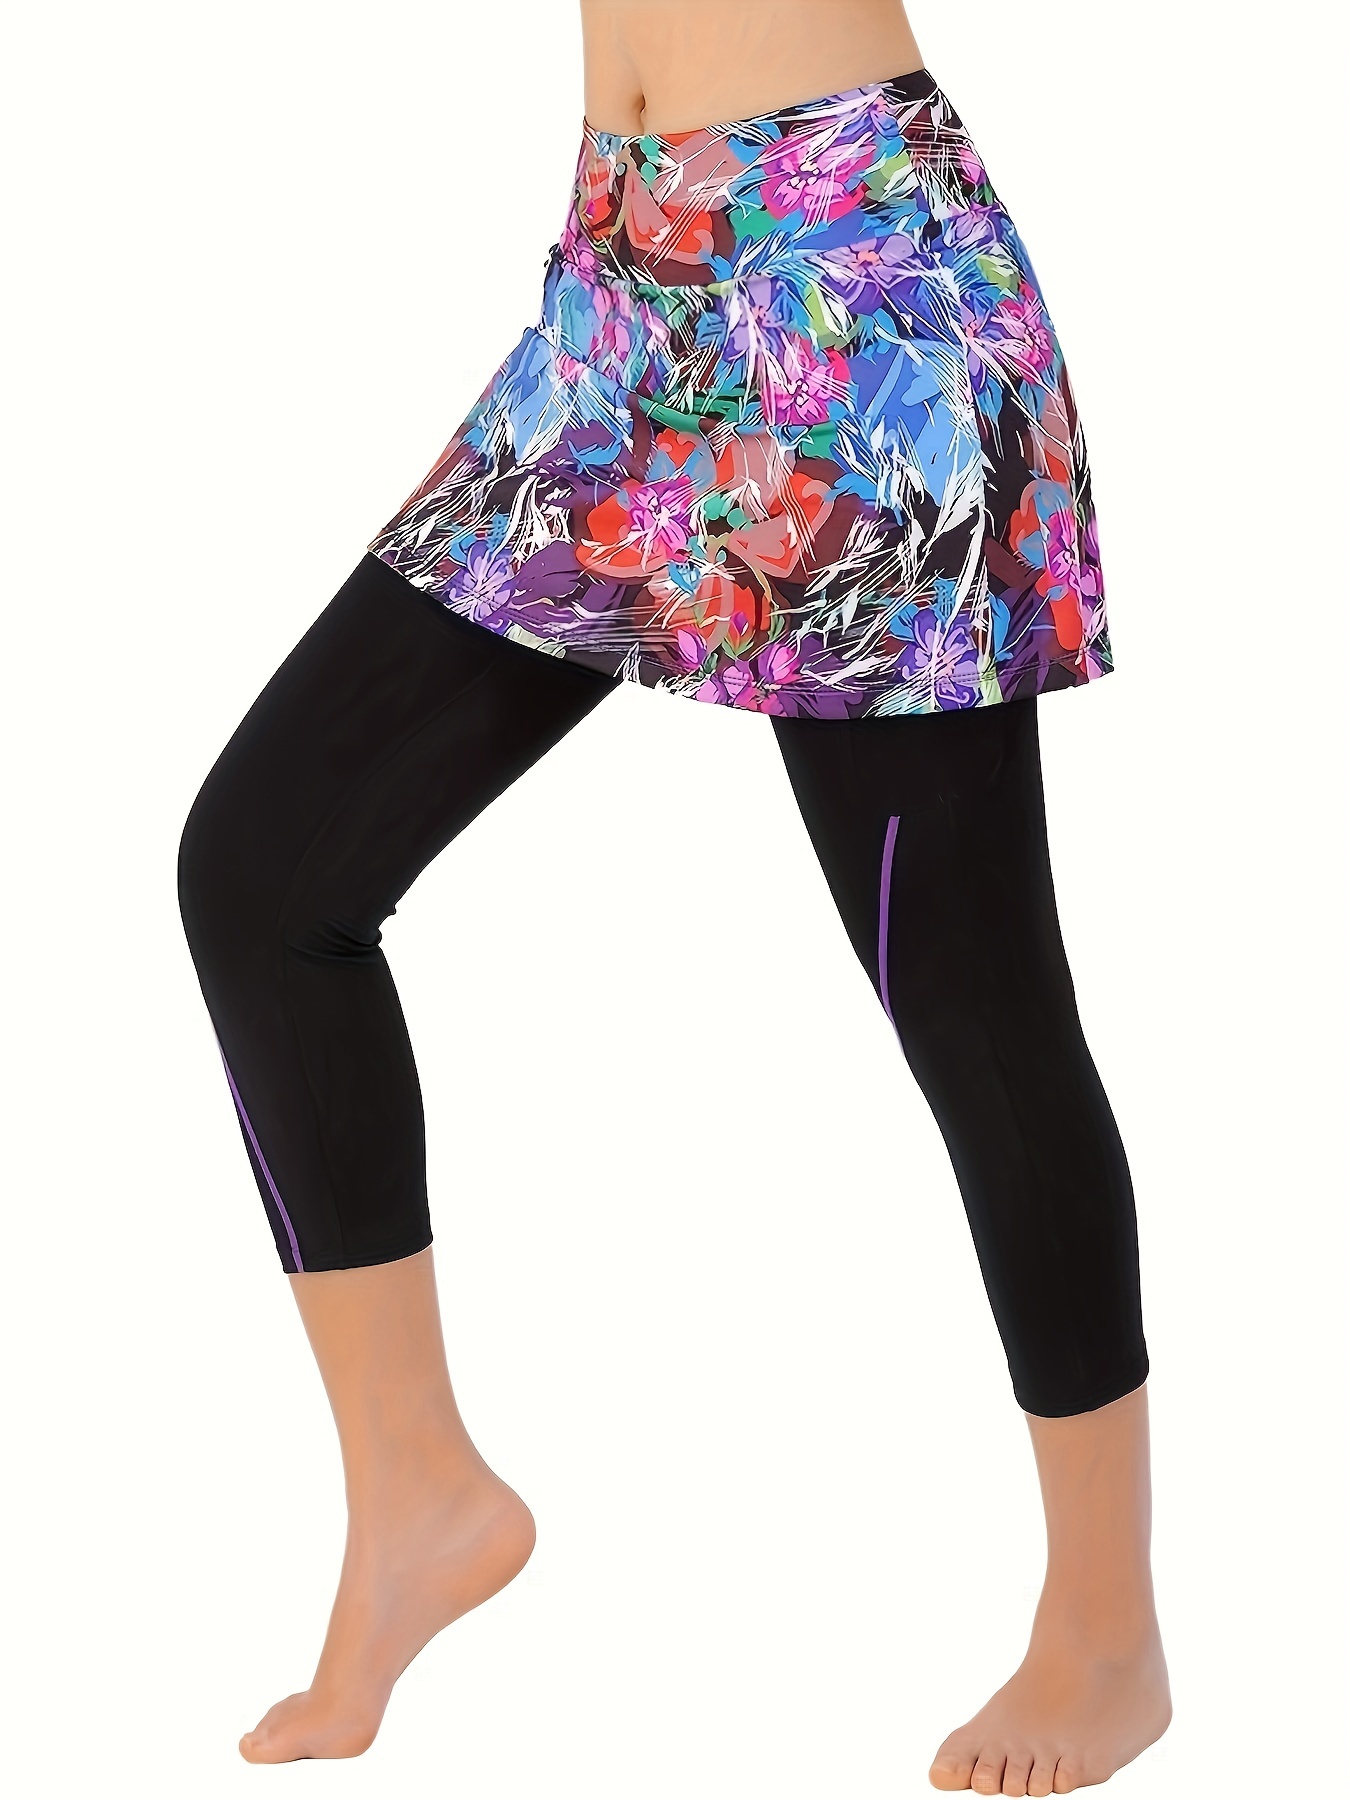 Women's Athletic Skirt Leggings With Pockets - Perfect for Tennis, Golf &  More!